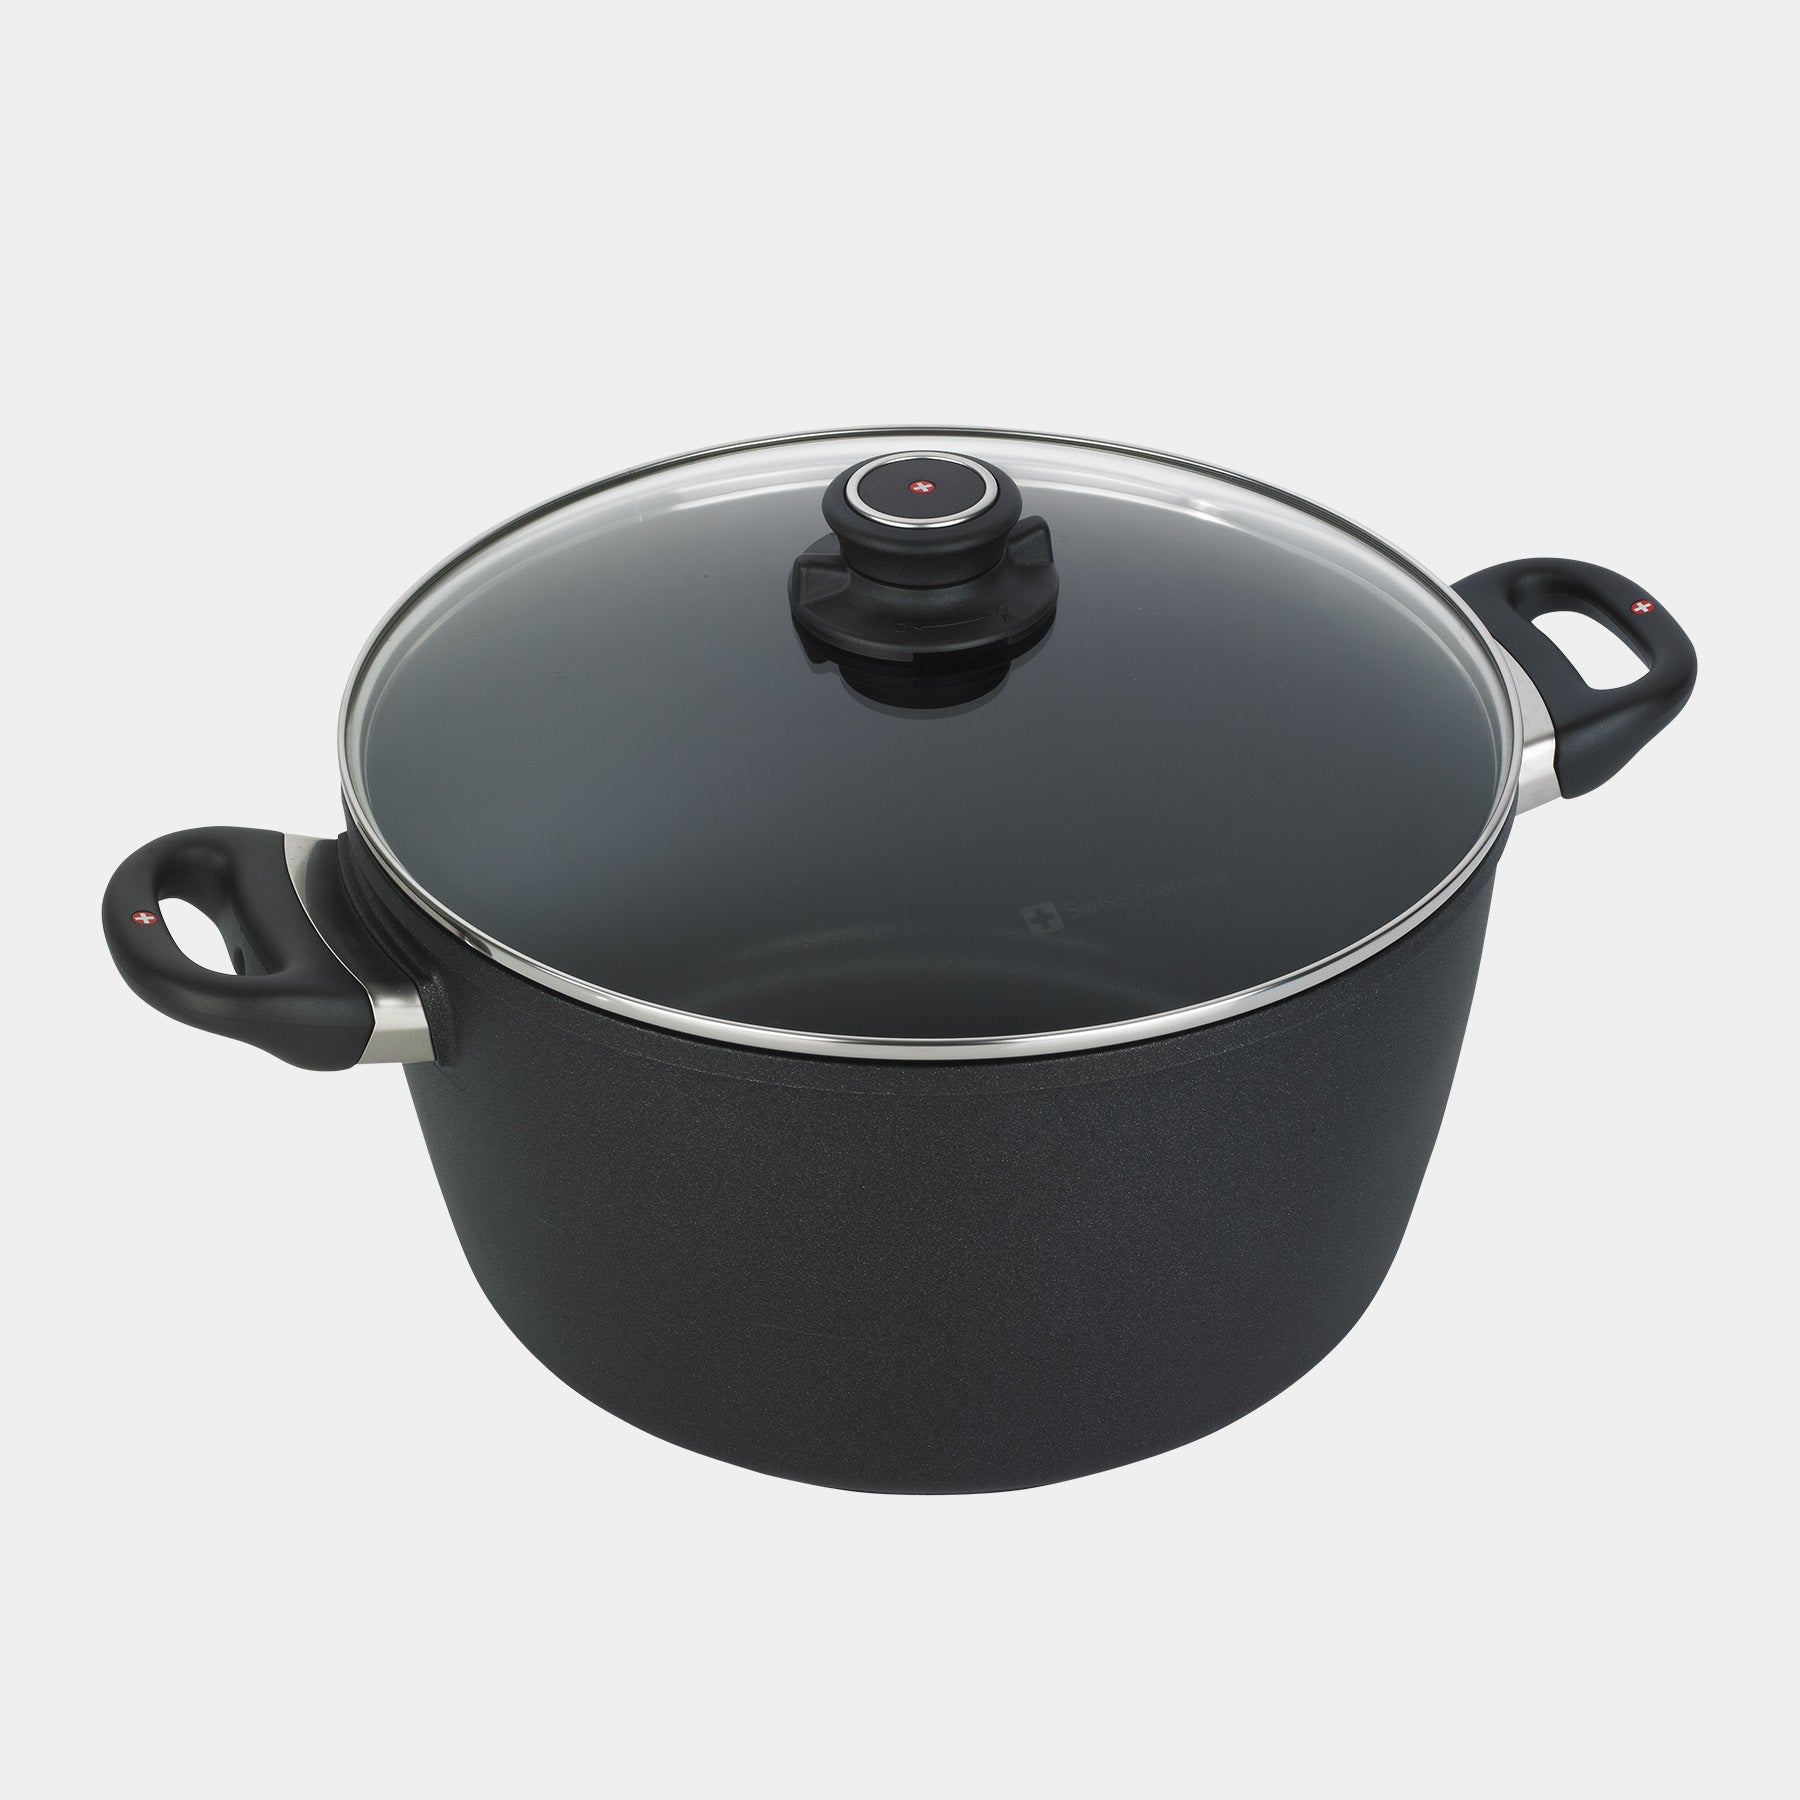 XD Nonstick 8.5 qt Stock Pot with Glass Lid